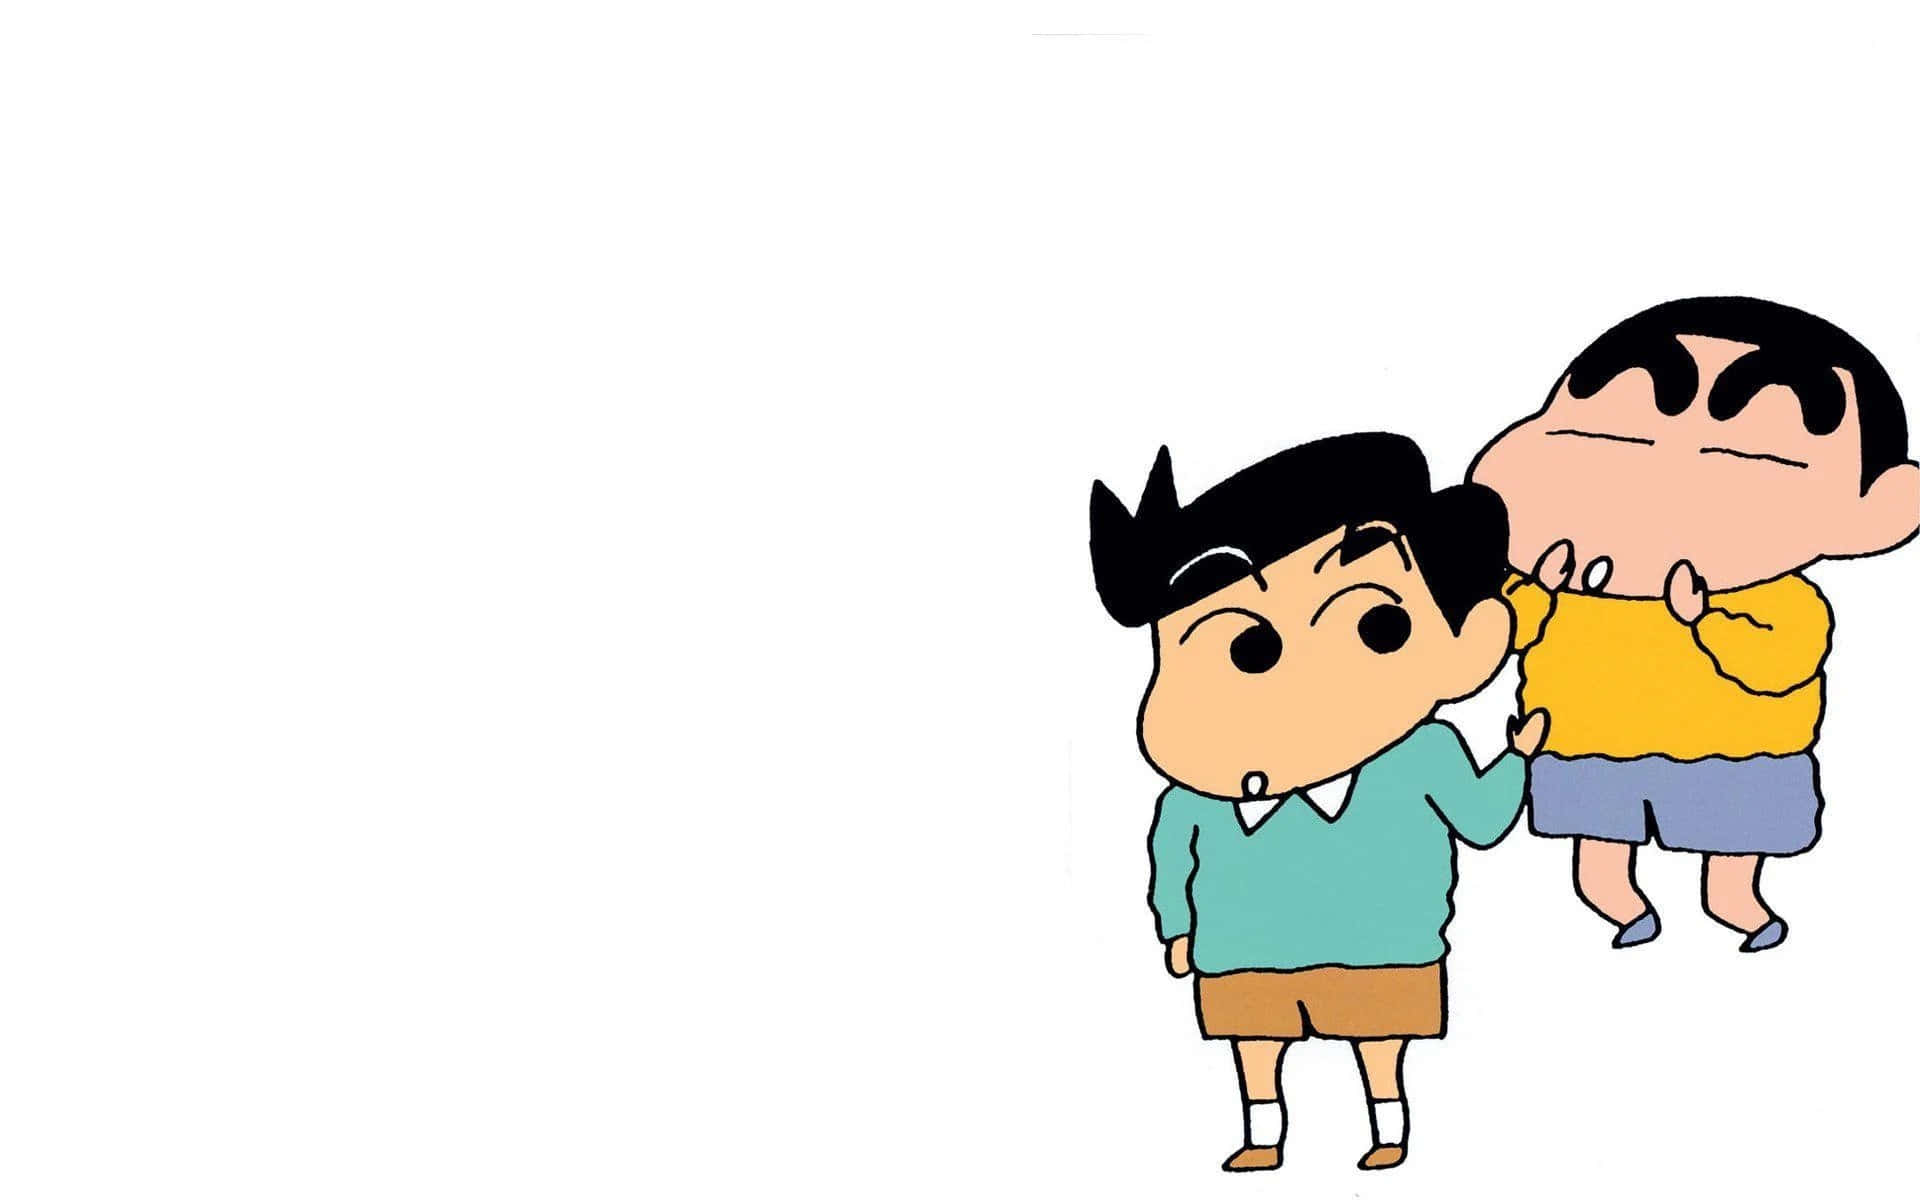 "Spreading joy and laughter with Crayon Shin Chan!"